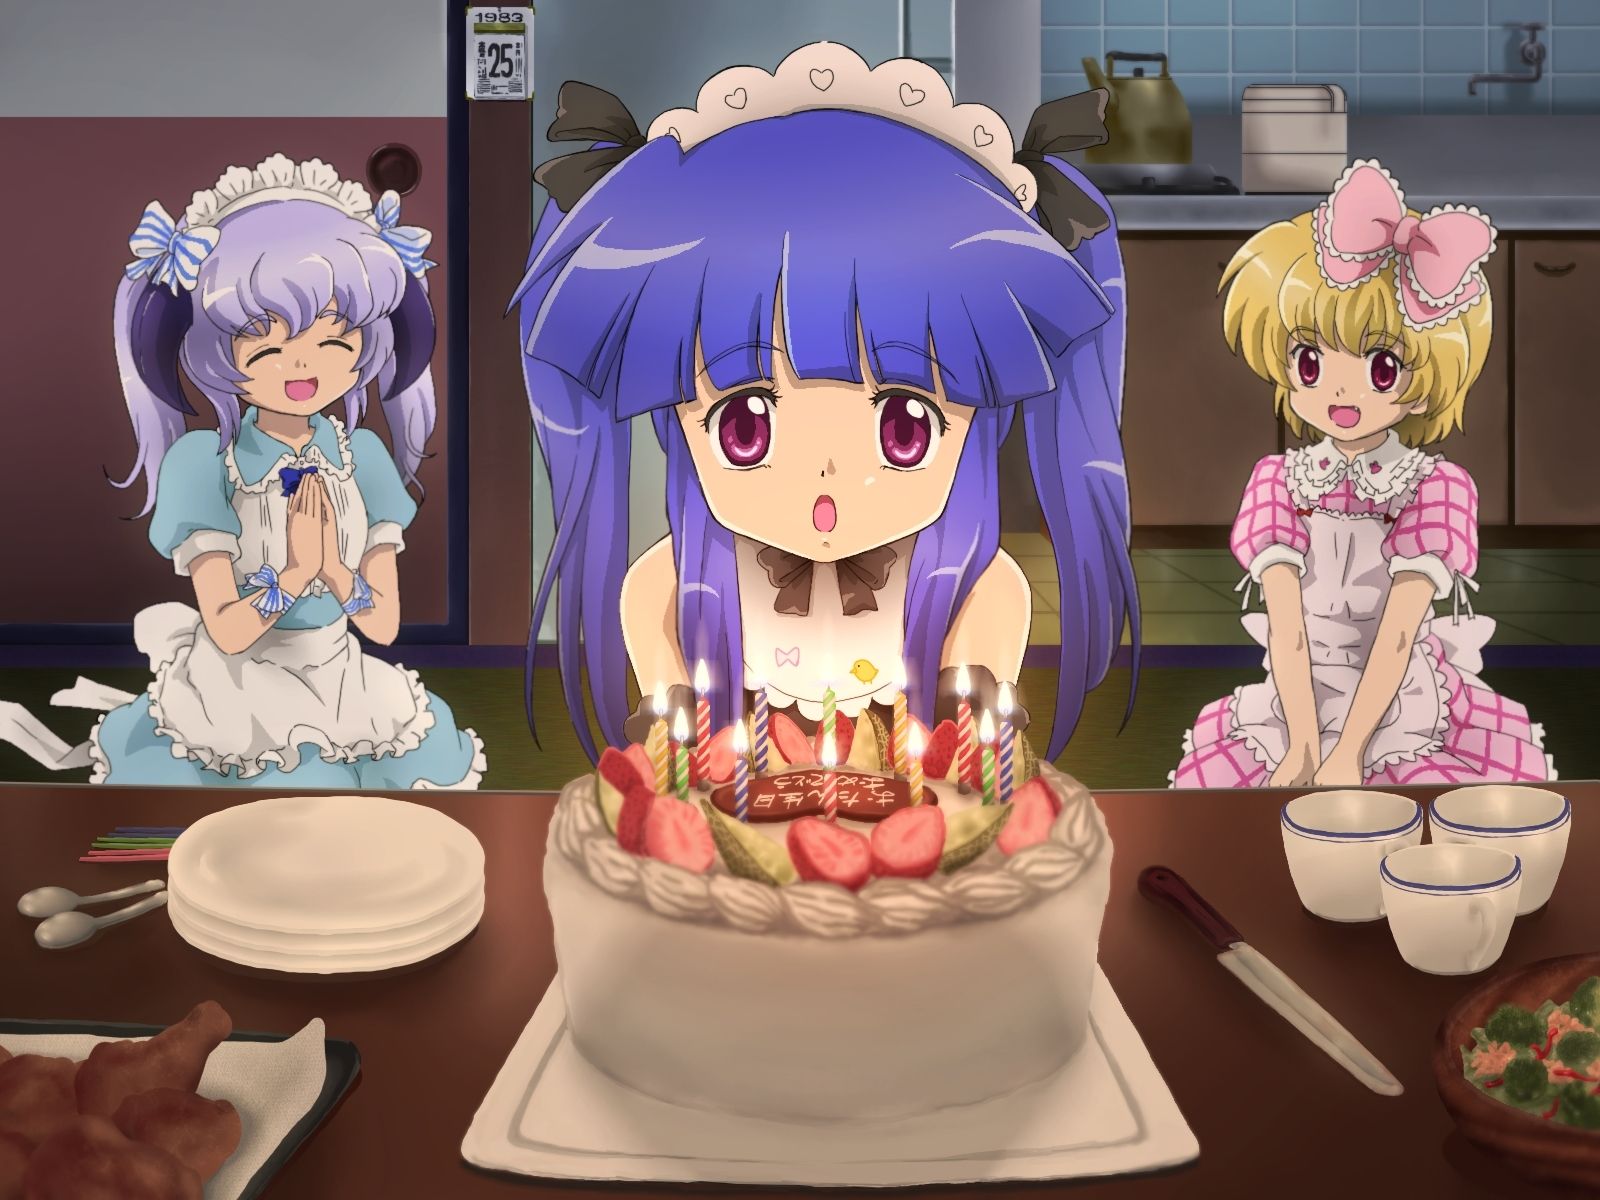 Wallpaper, anime, girls, party, cake, candles, waiting 1600x1200